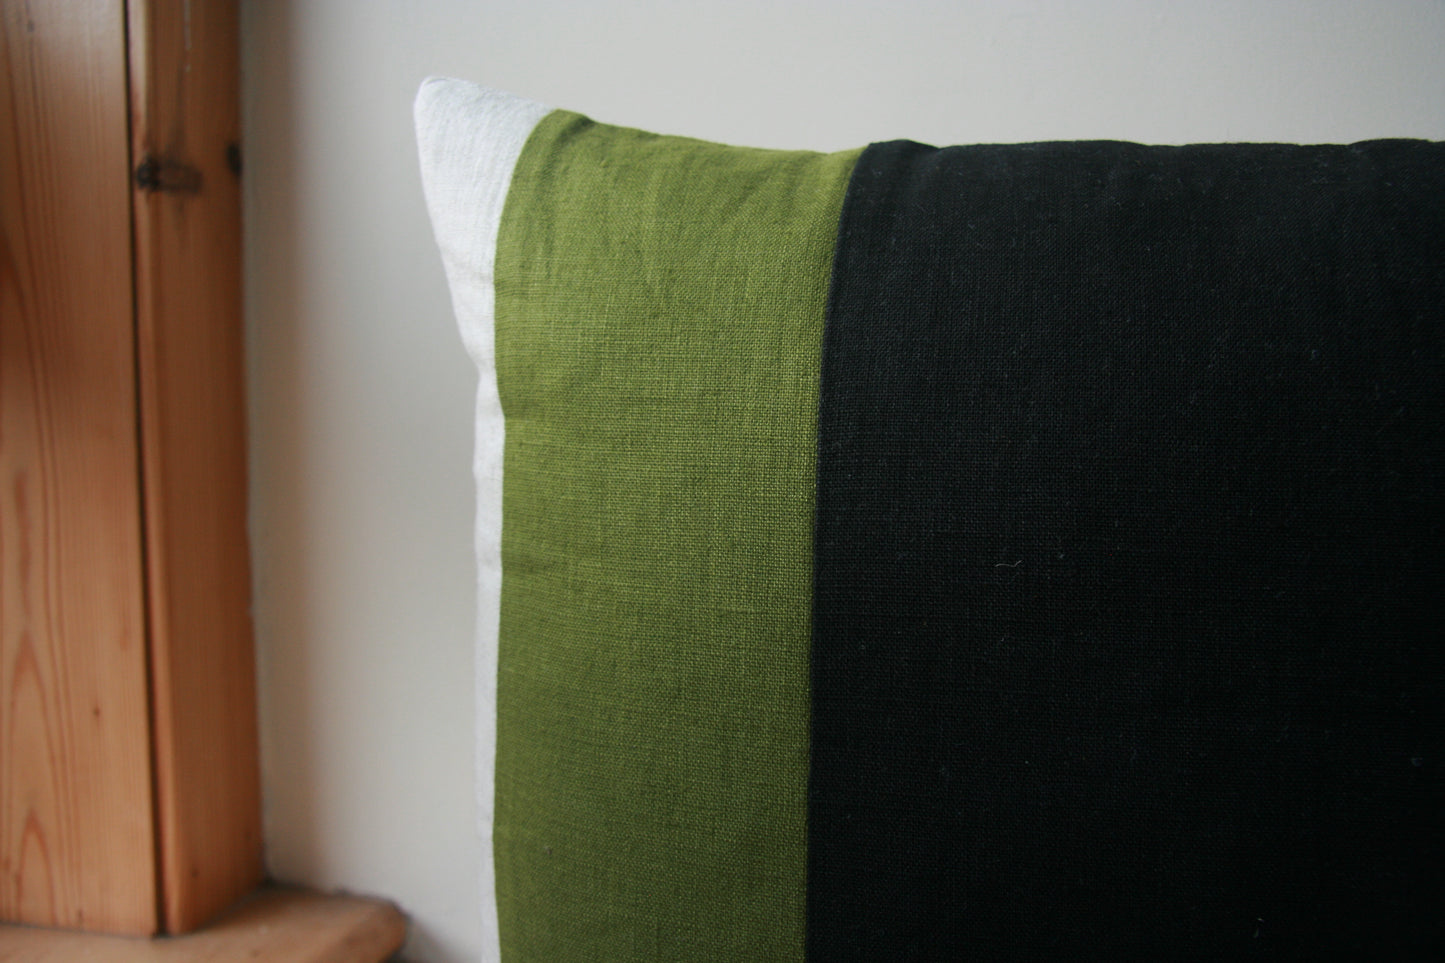 Close up of corner of cushion. Thin natural linen stripe visible, wider green stripe, widest black stripe at edge of image.